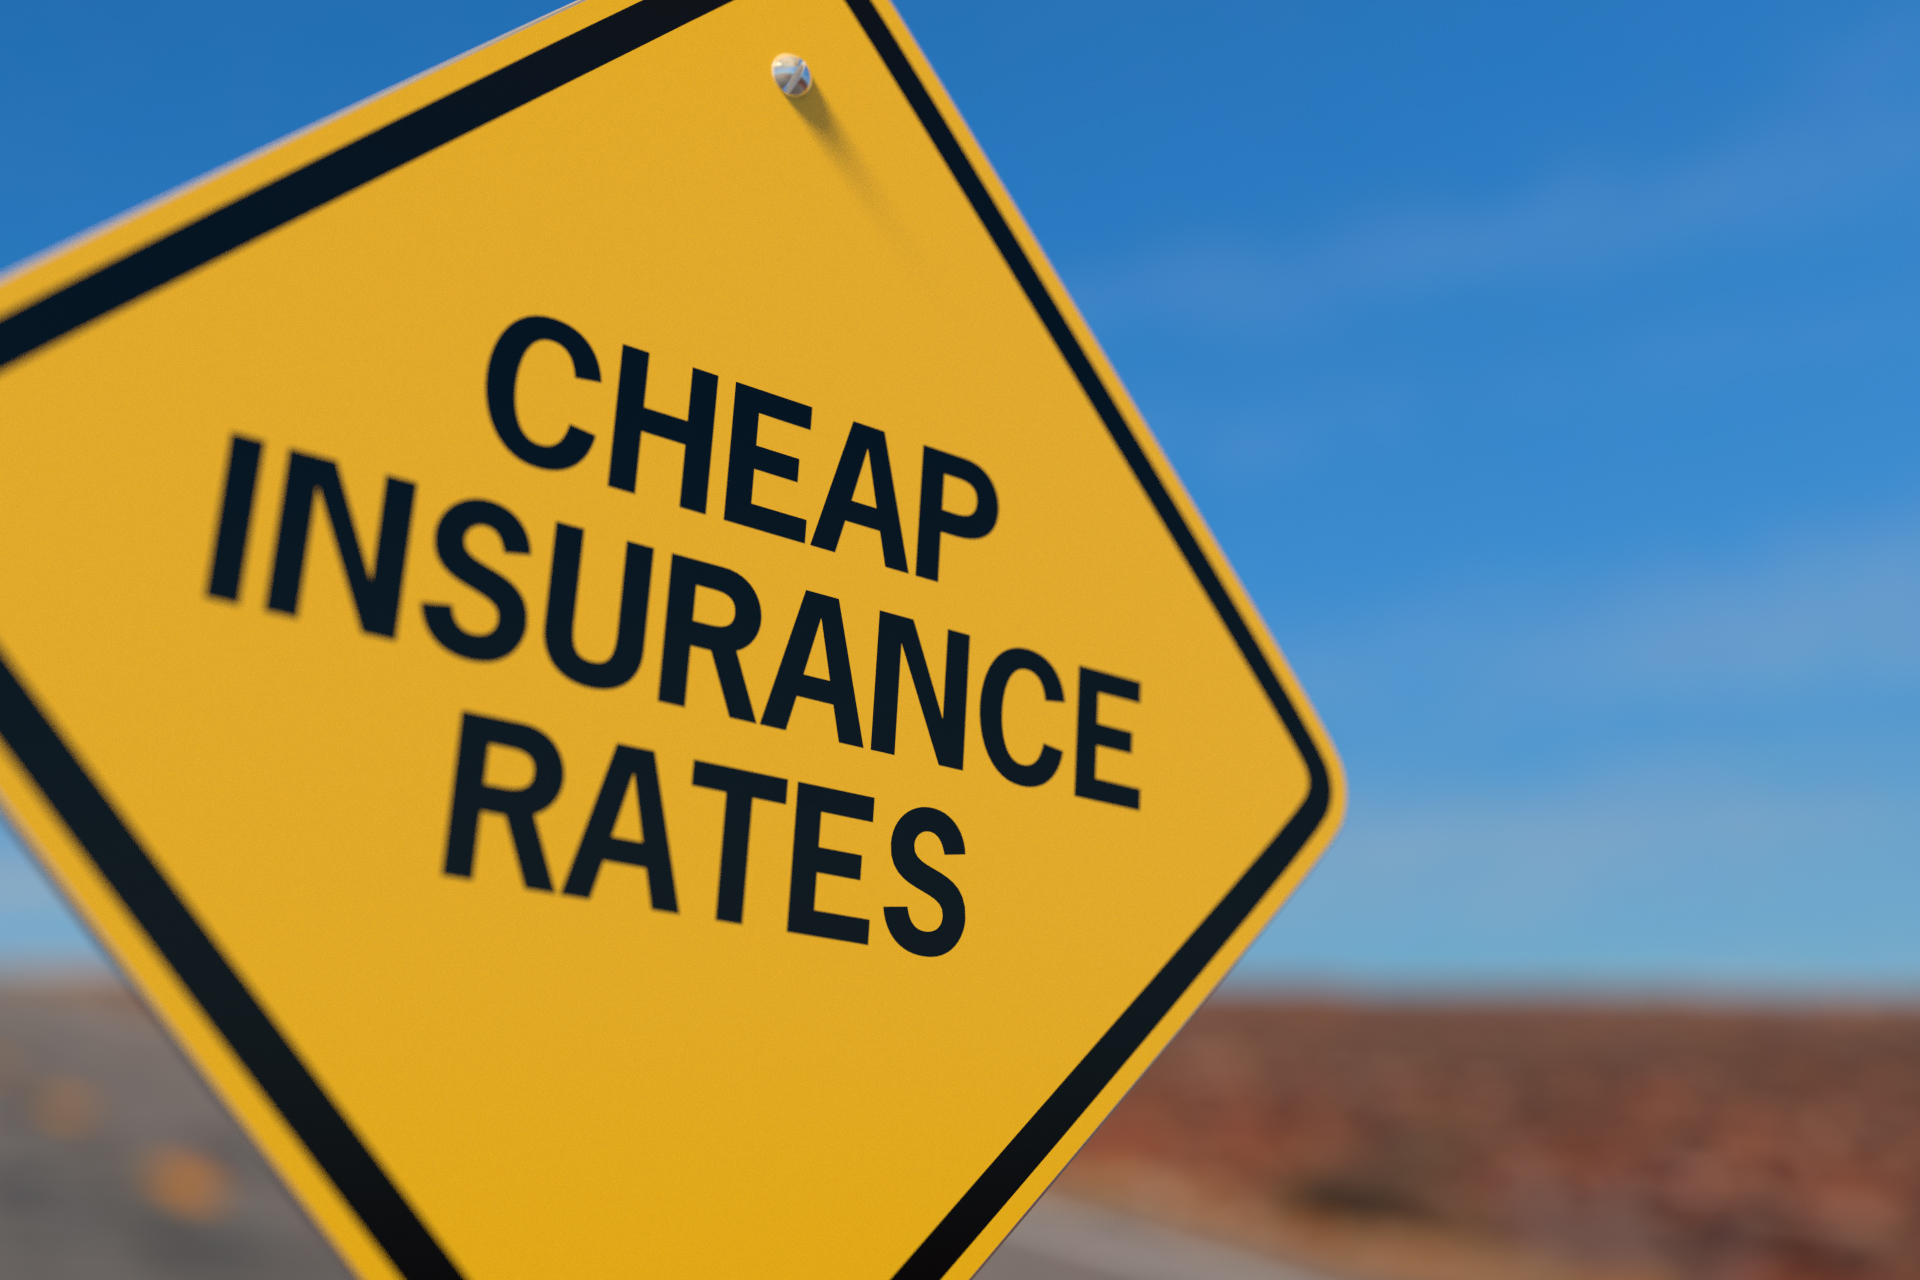 Cheaper insurance rates road sign free image download